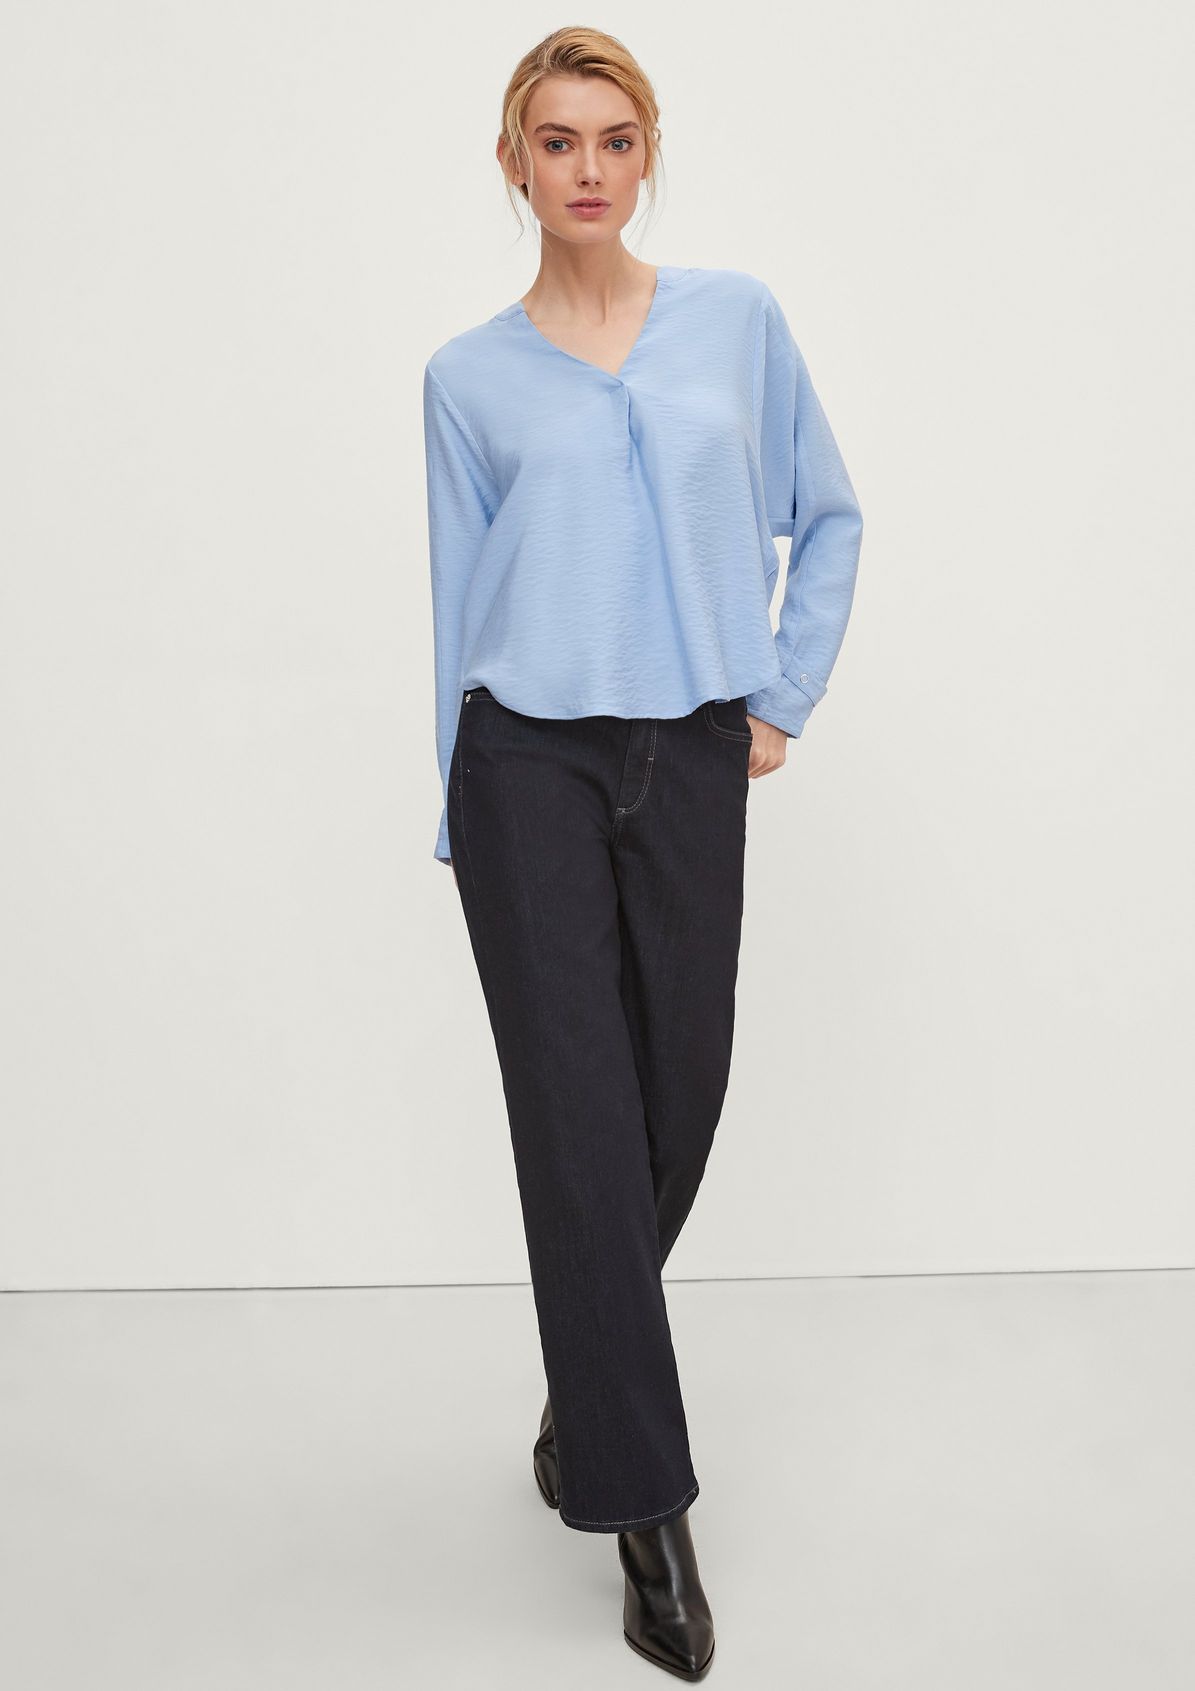 Breezy top in a viscose blend from comma